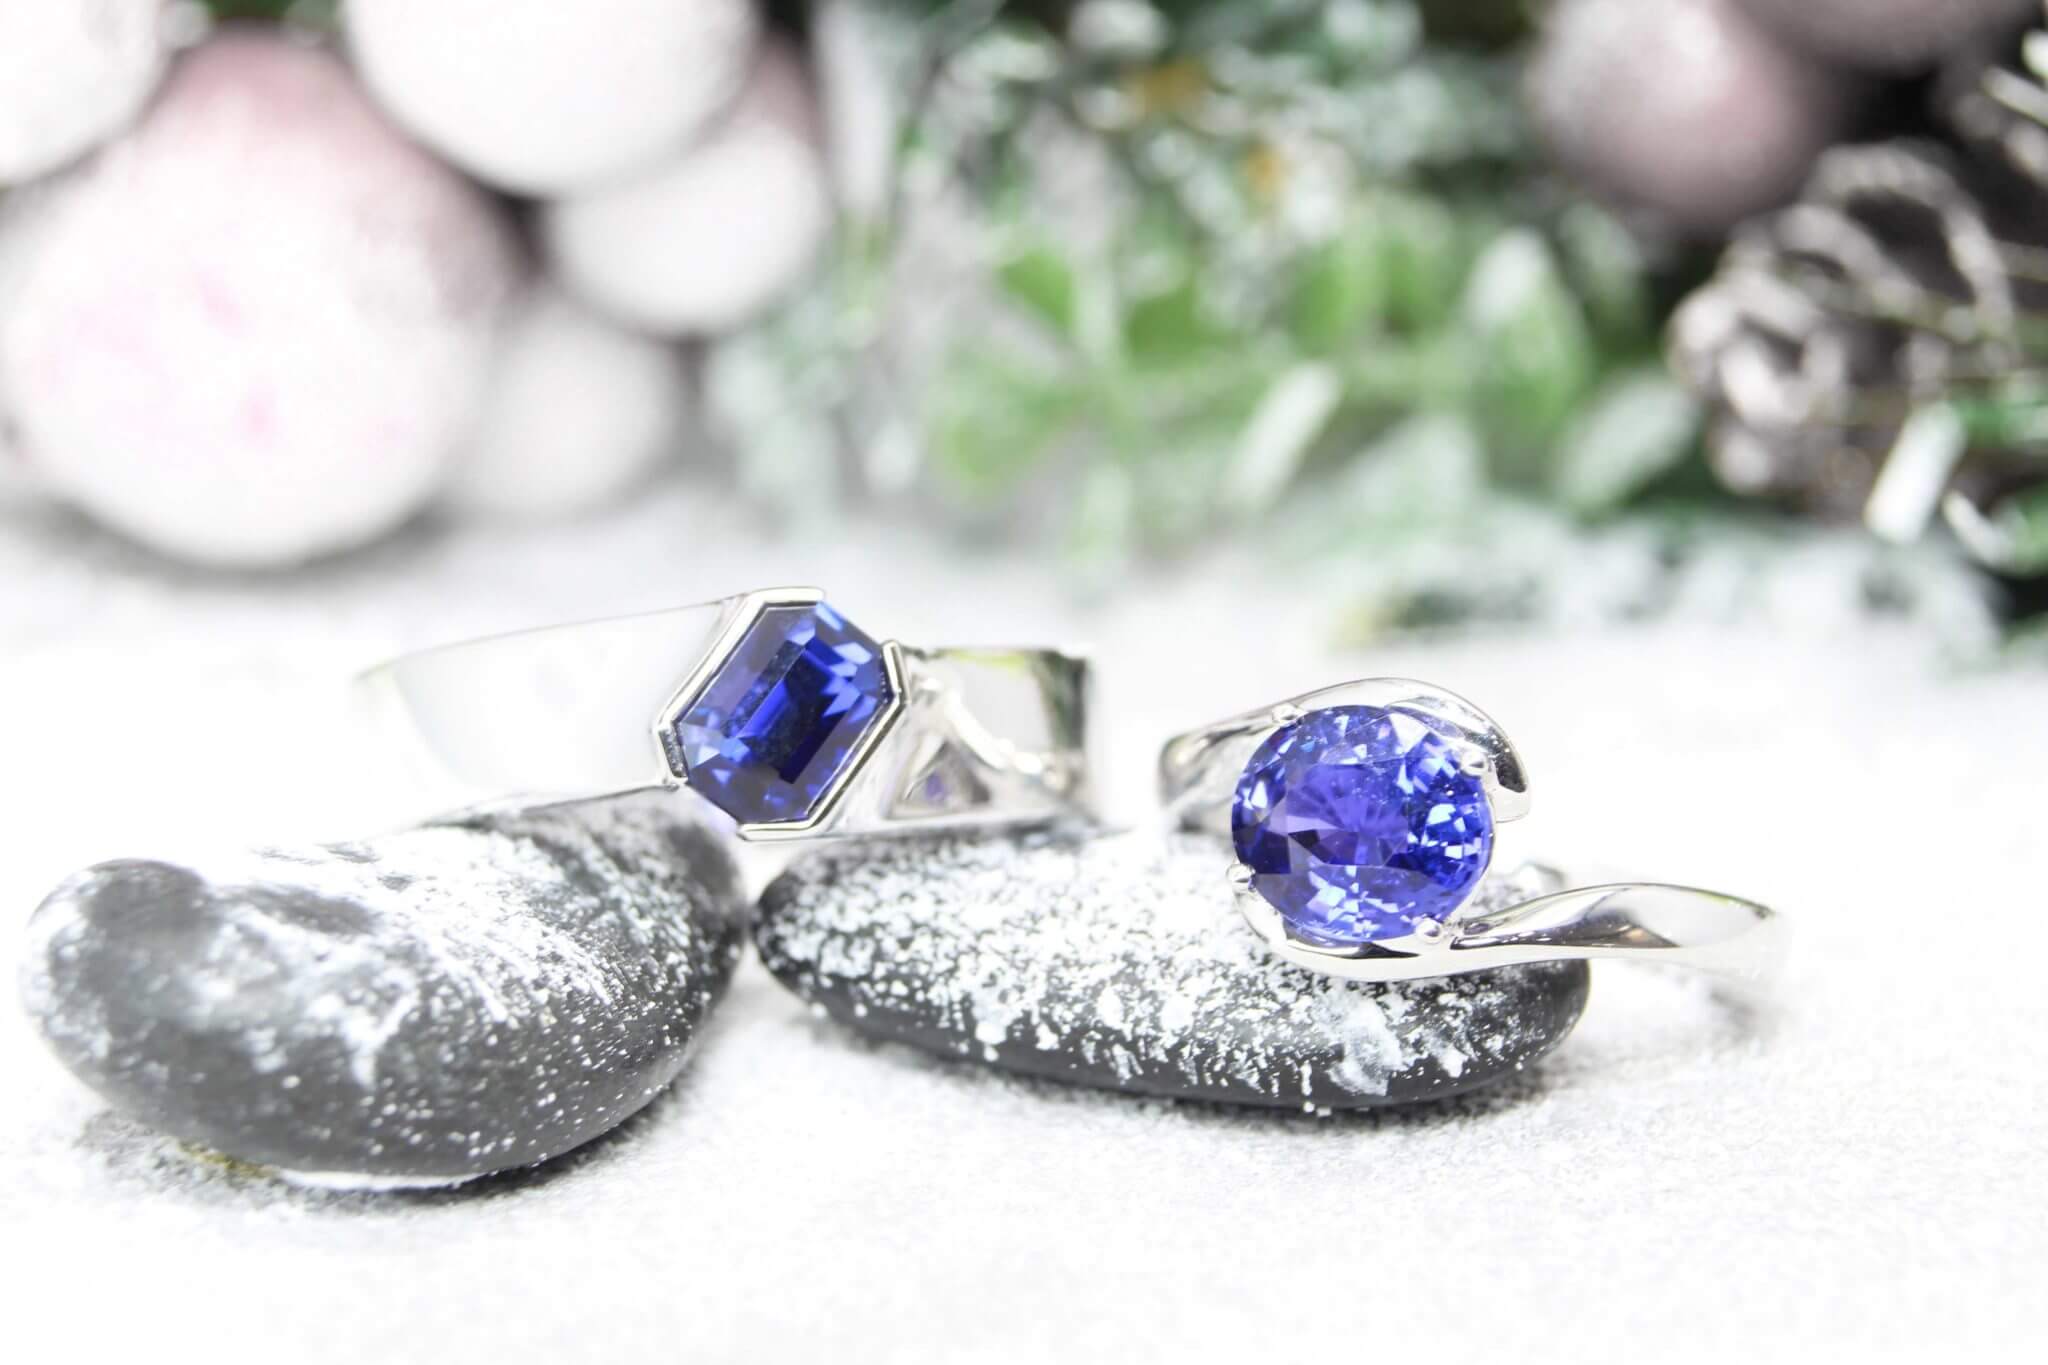 Customised Anniversary wedding bands with colour change sapphire gemstone; blue to violet, looking for a unique wedding bands customised with gemstone for anniversary | Singapore Local Private Jeweller in custom made unique wedding ring and anniversary ring